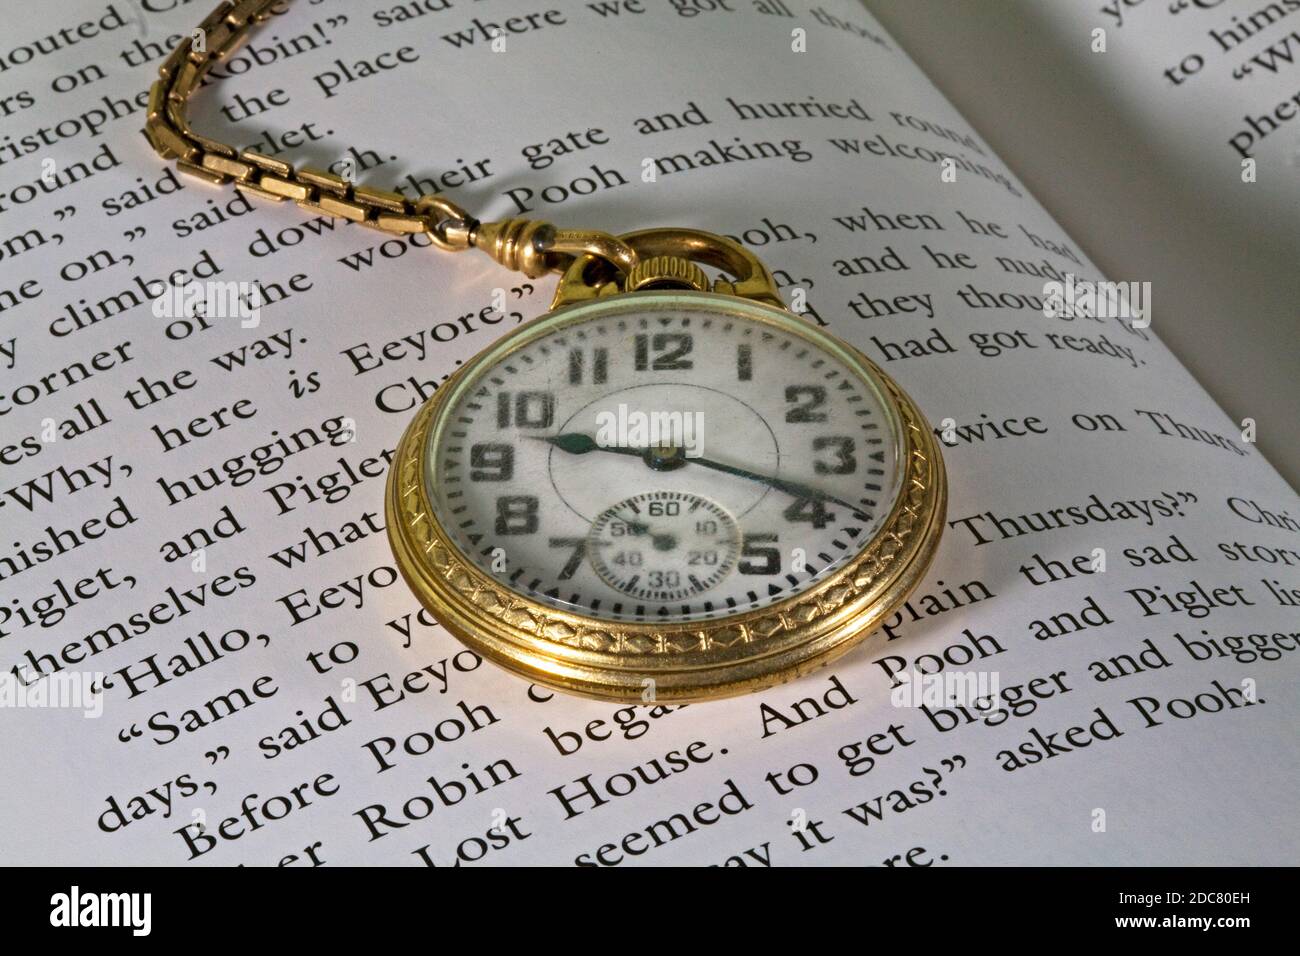 A man's gold pocket watch and chain lying on a copy of Winnie the Pooh. Stock Photo